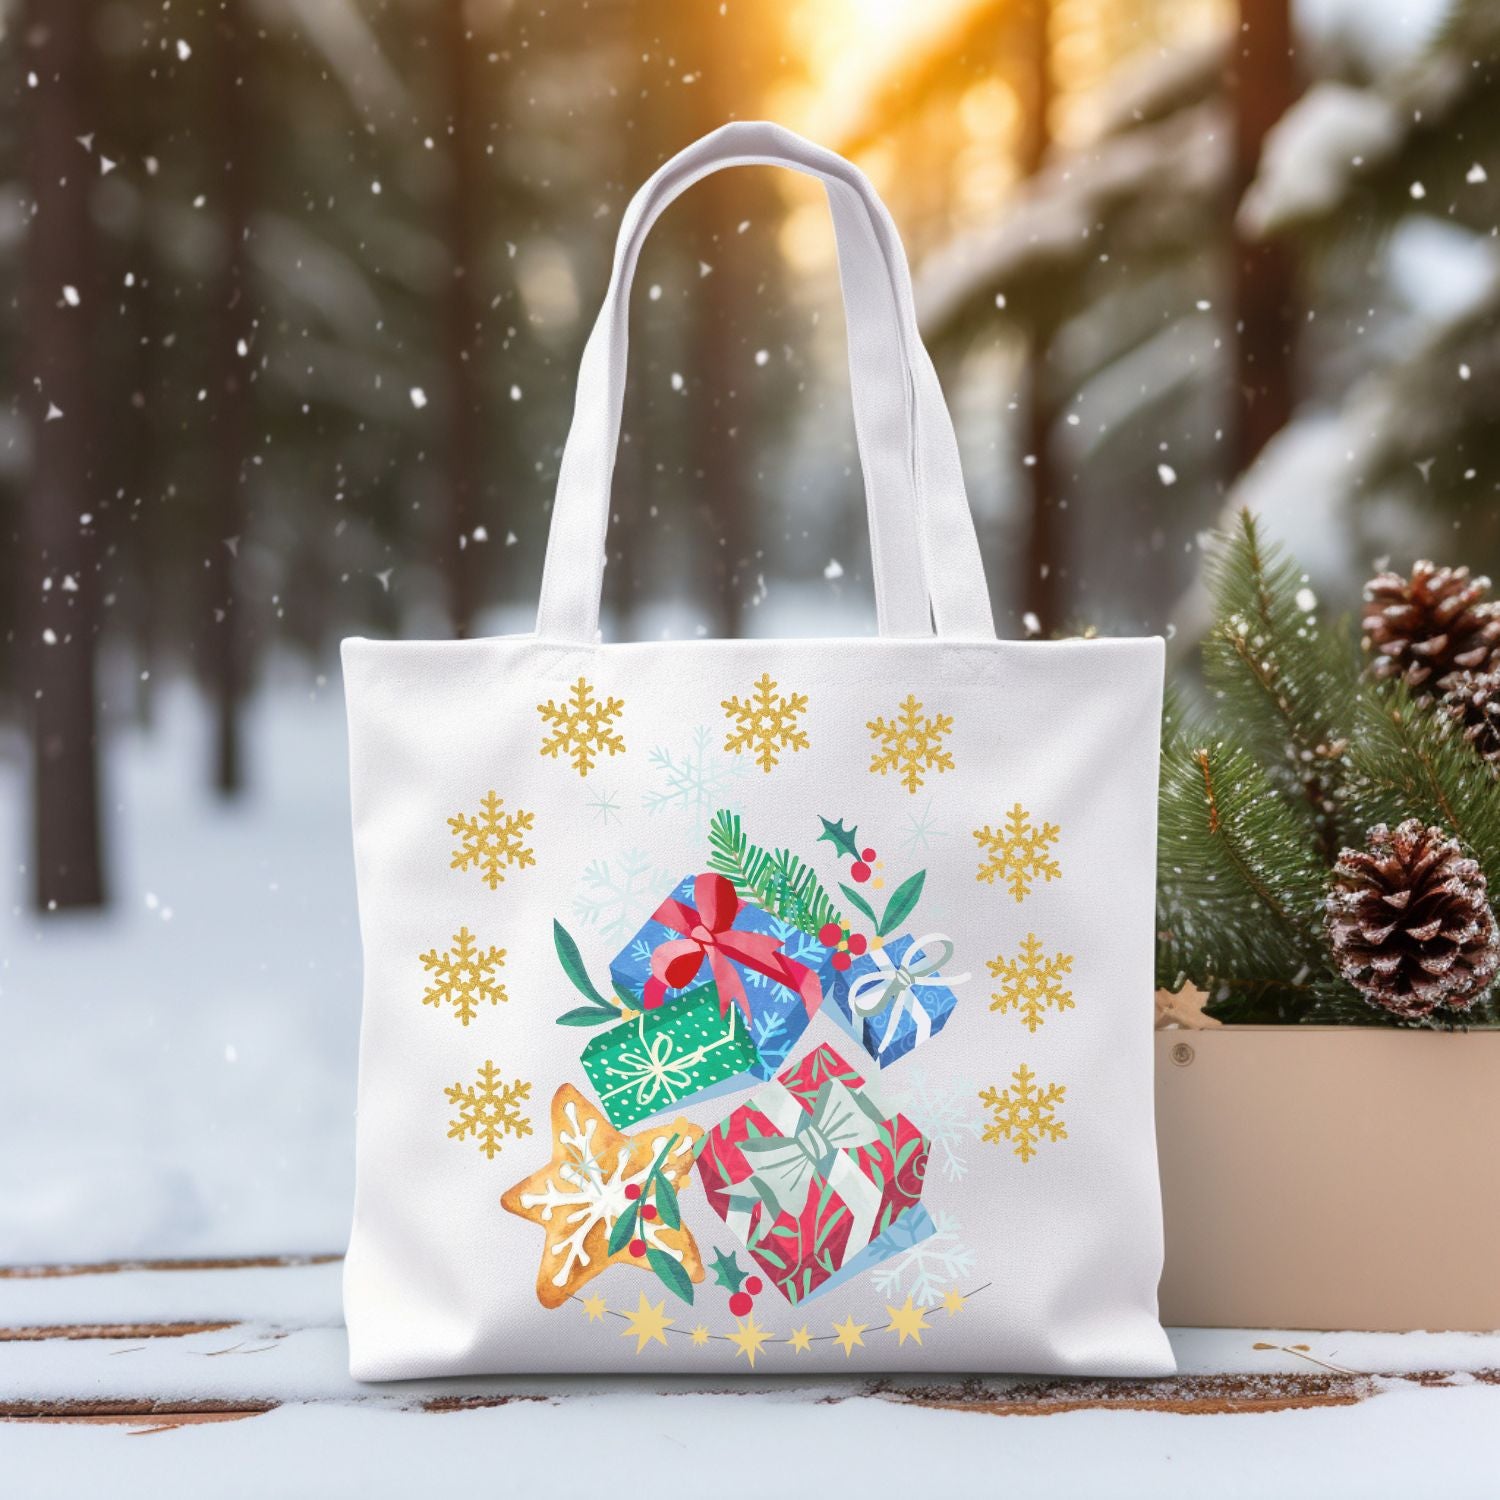 Christmas Tote Bag | Holiday Tote for Festive Fashion and Seasonal Shopping Accessories   